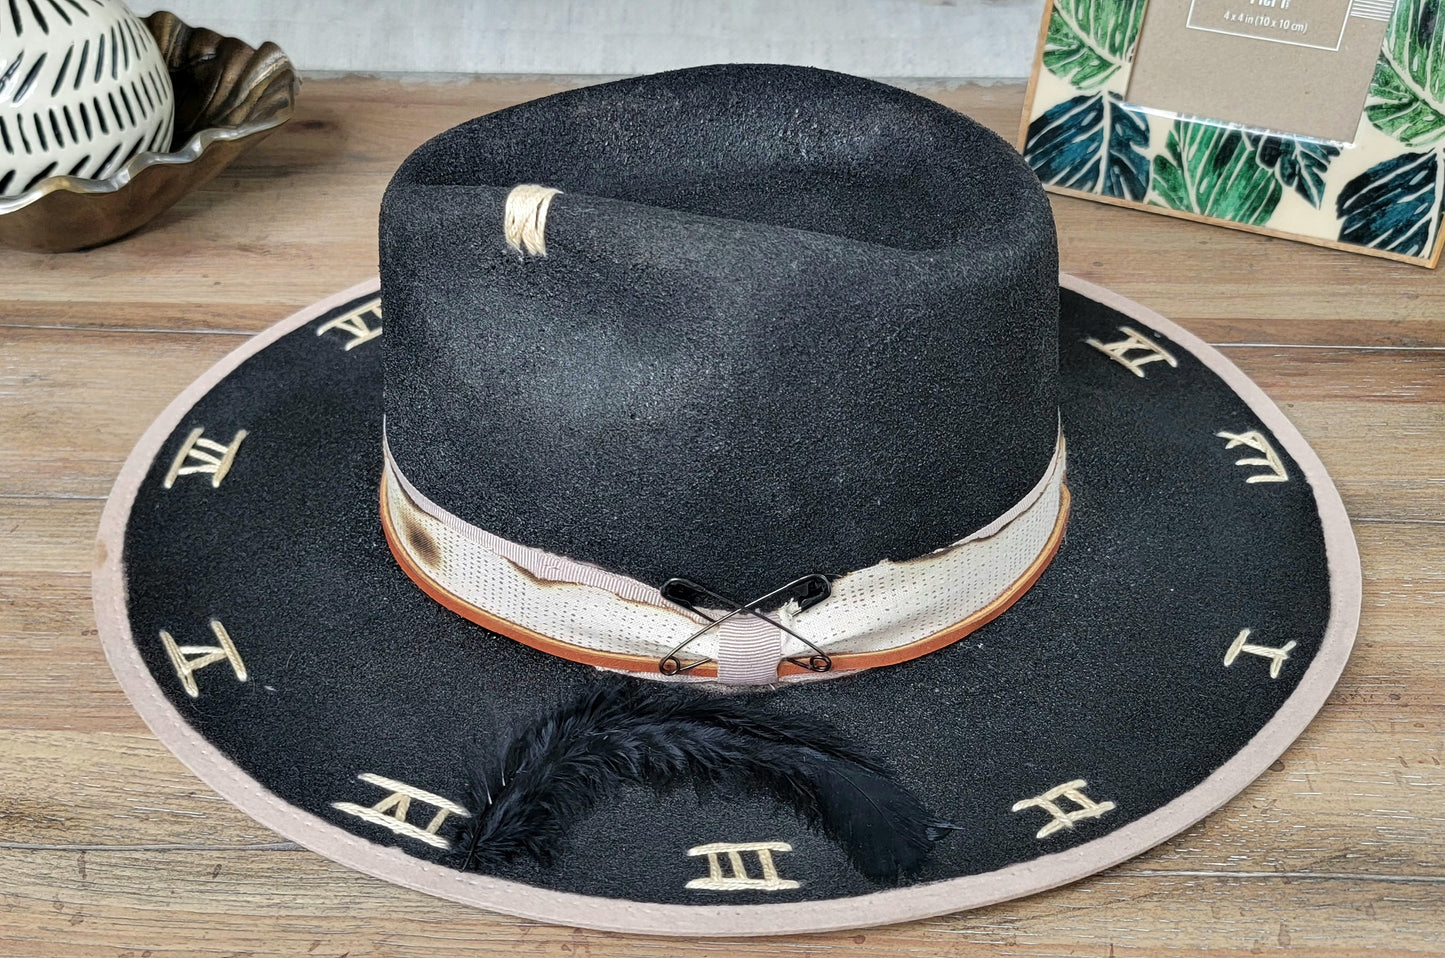 Passing Time Fedora hat